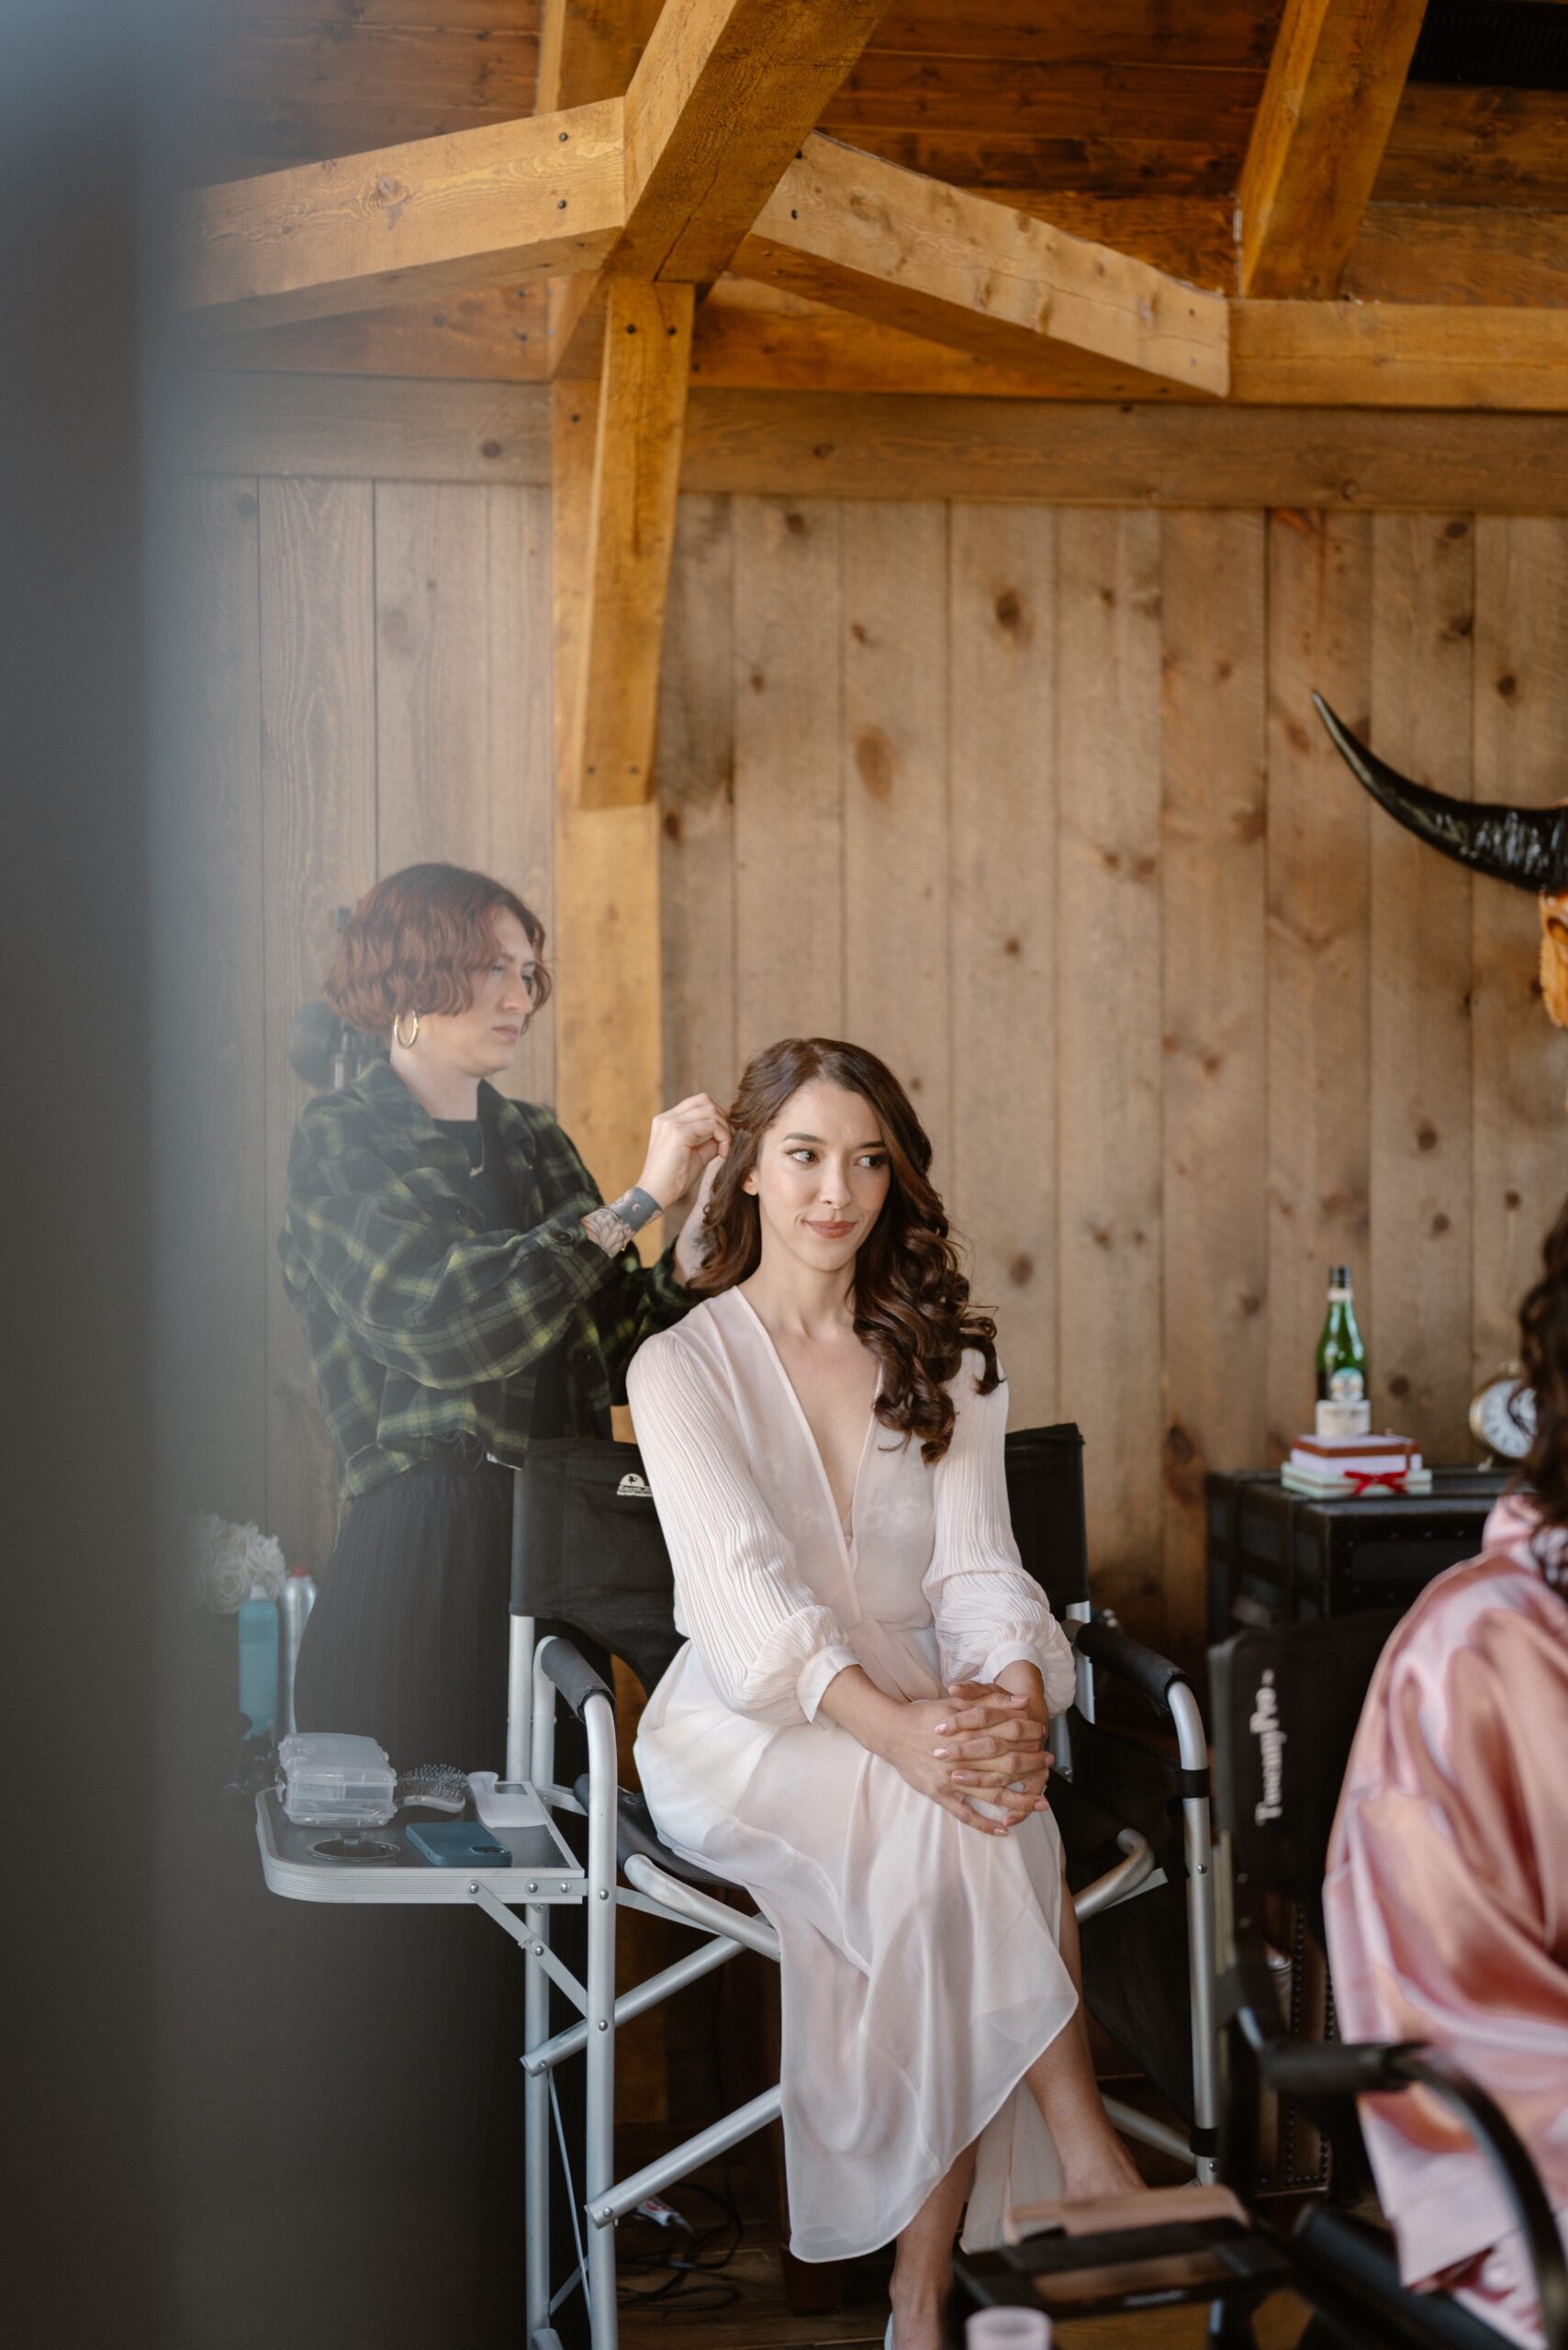 A bride gets her hair and makeup done. Photo by Ashley Joyce.